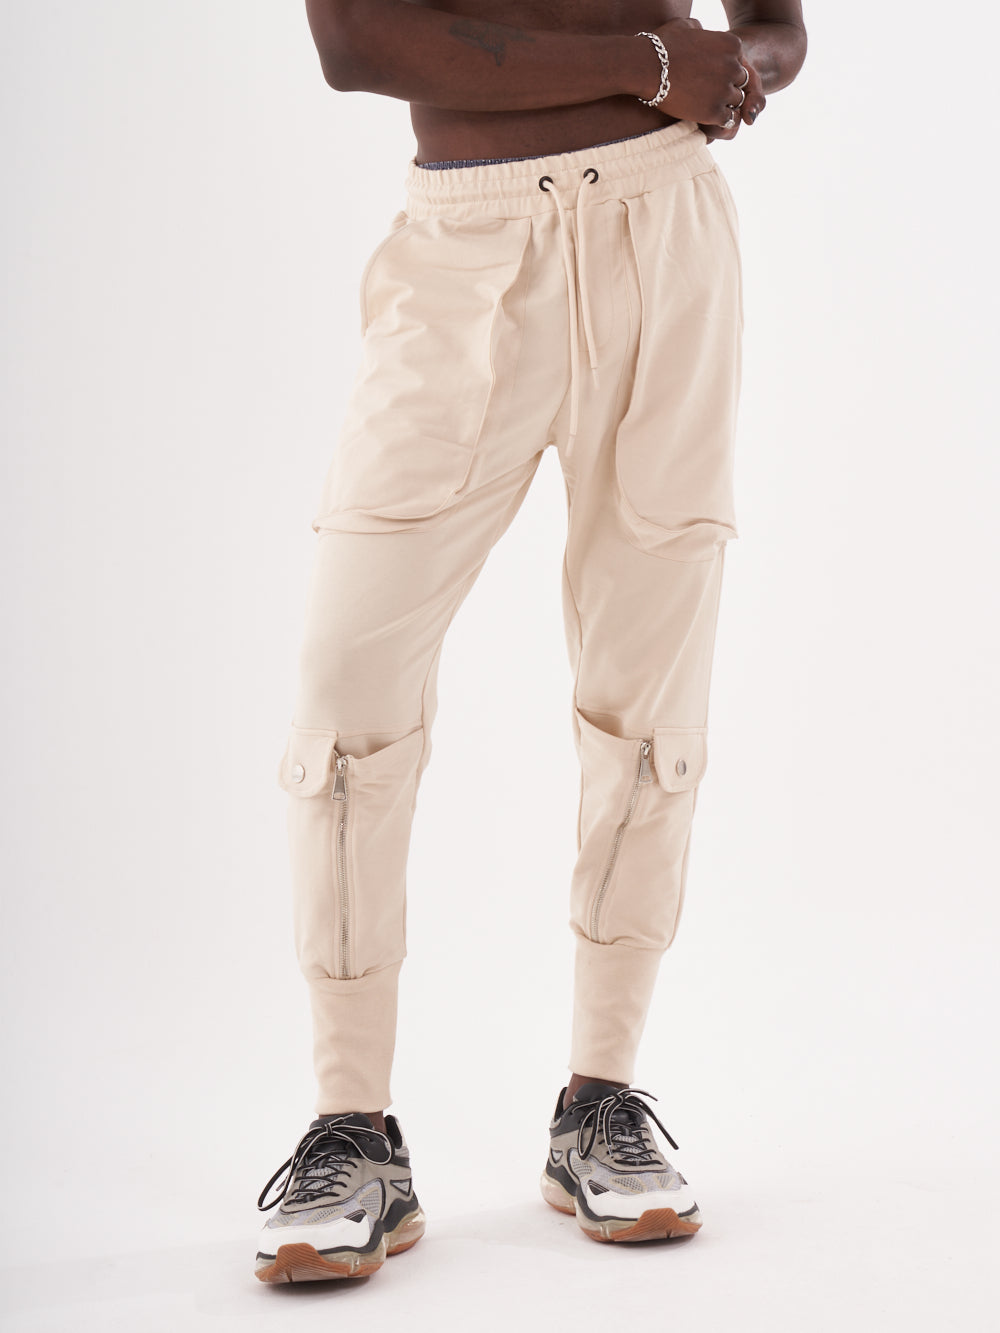 A man wearing GUERRILLA | BEIGE jogger pants and a white t-shirt.